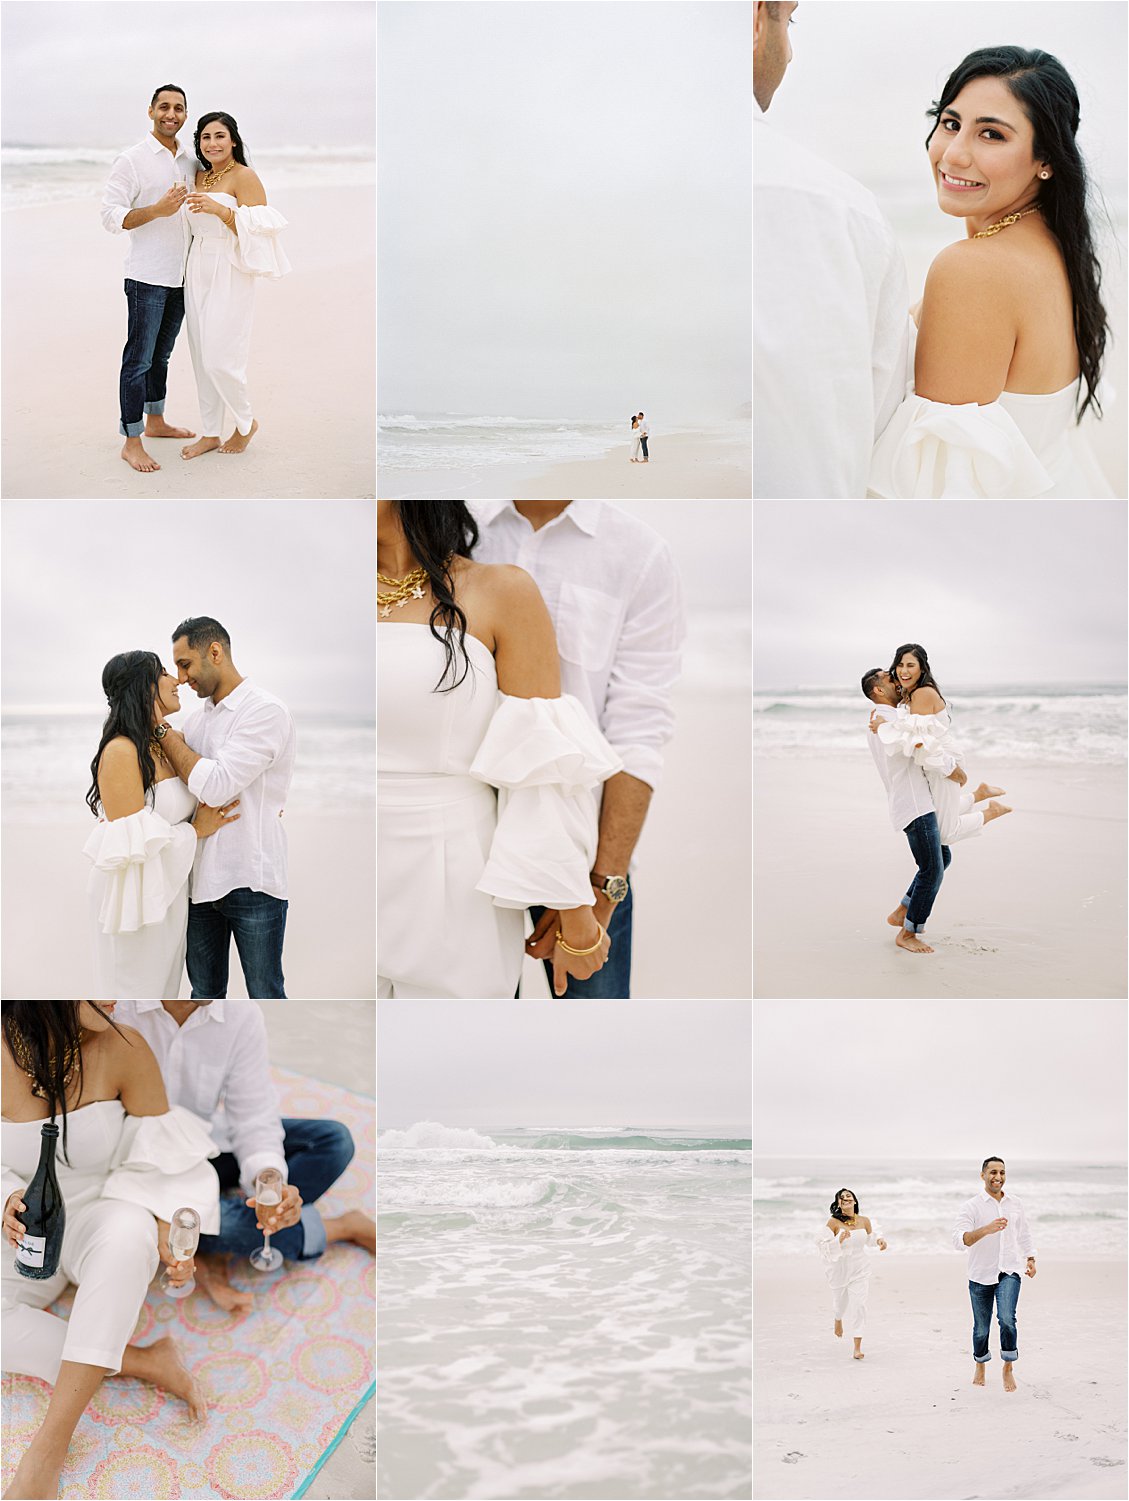 Foggy Rosemary Beach Engagement Session Preview with 30A Film Wedding and Engagement Photographer, Renee Hollingshead. South Asian Bride and Groom, Pre Wedding Shoot in Alys Beach, Florida